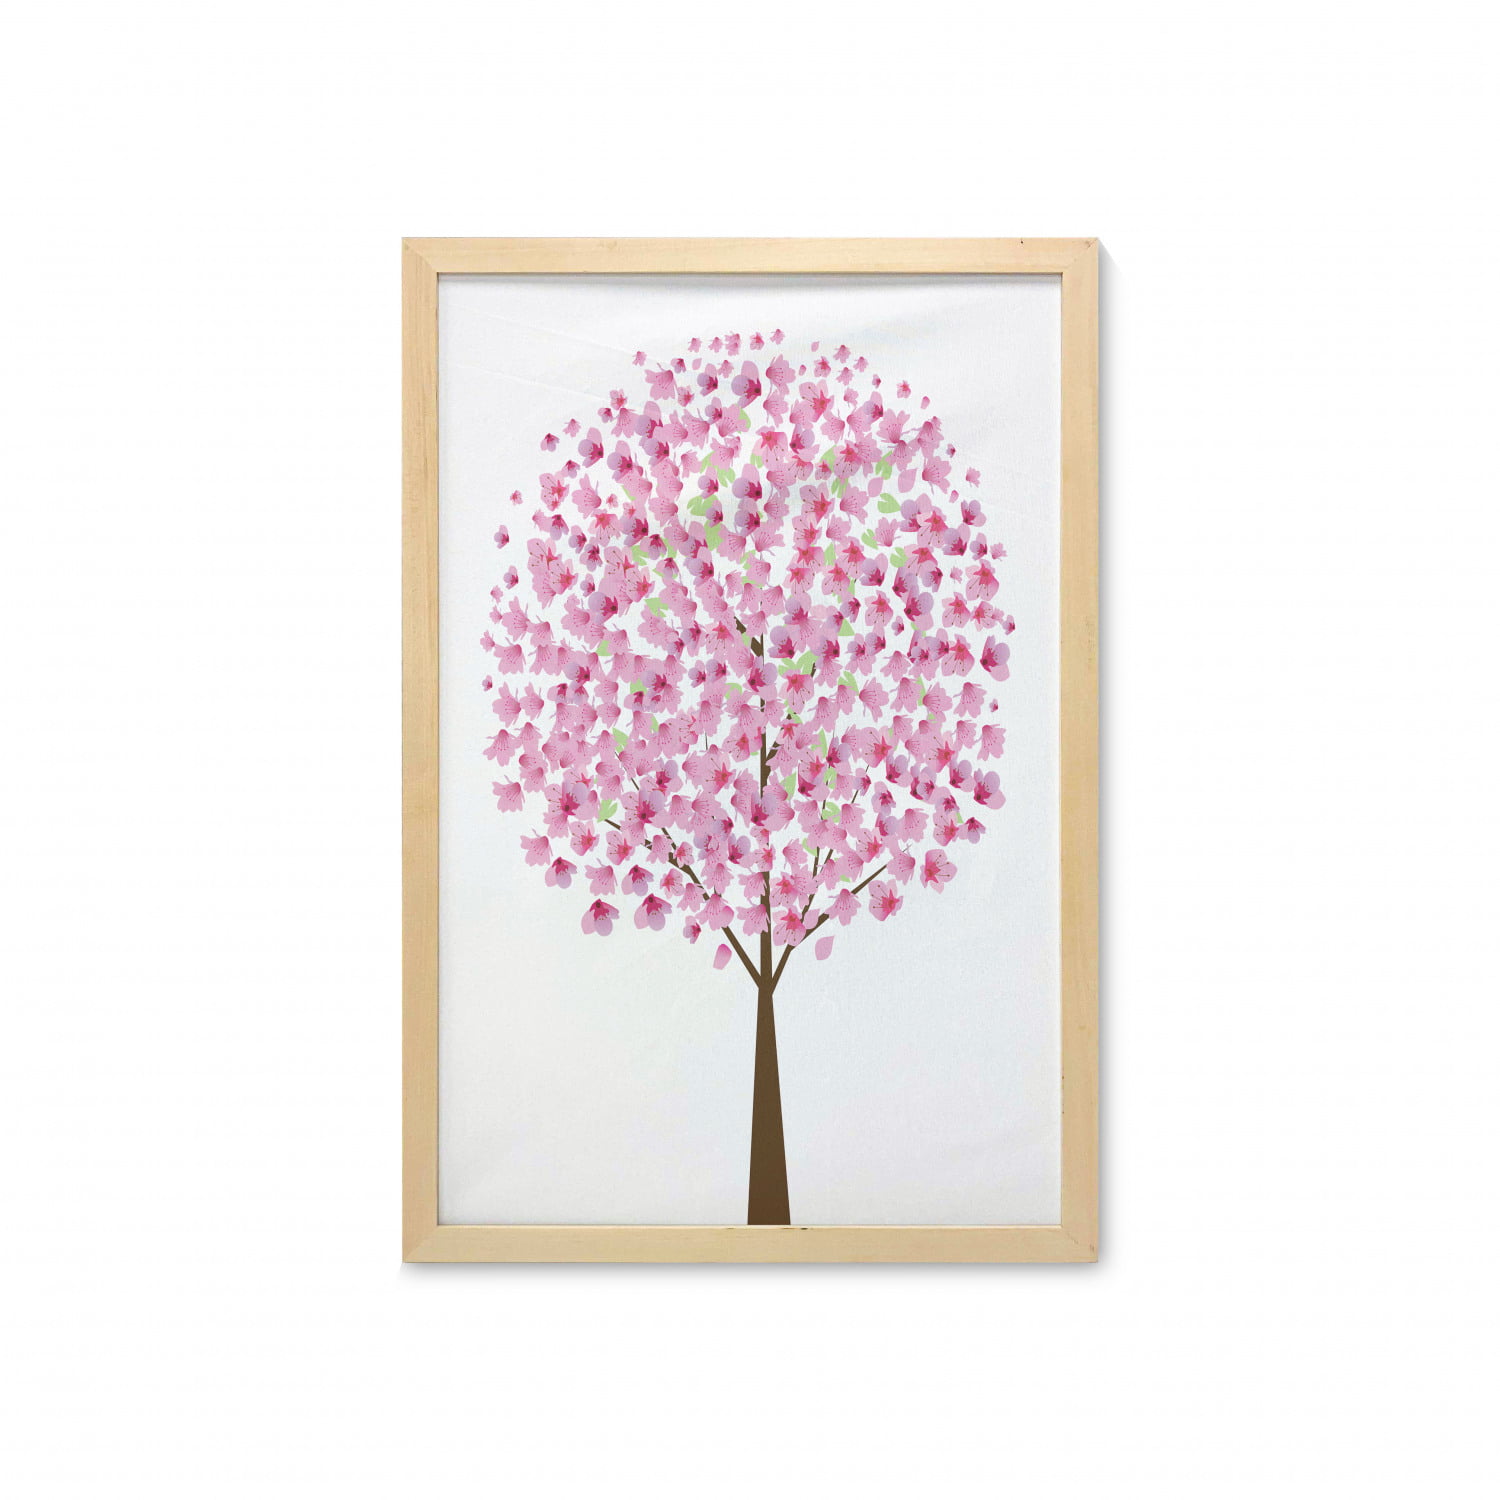 Picture Poster Flowers Large Framed Print Japanese Pink Cherry Blossom Tree 